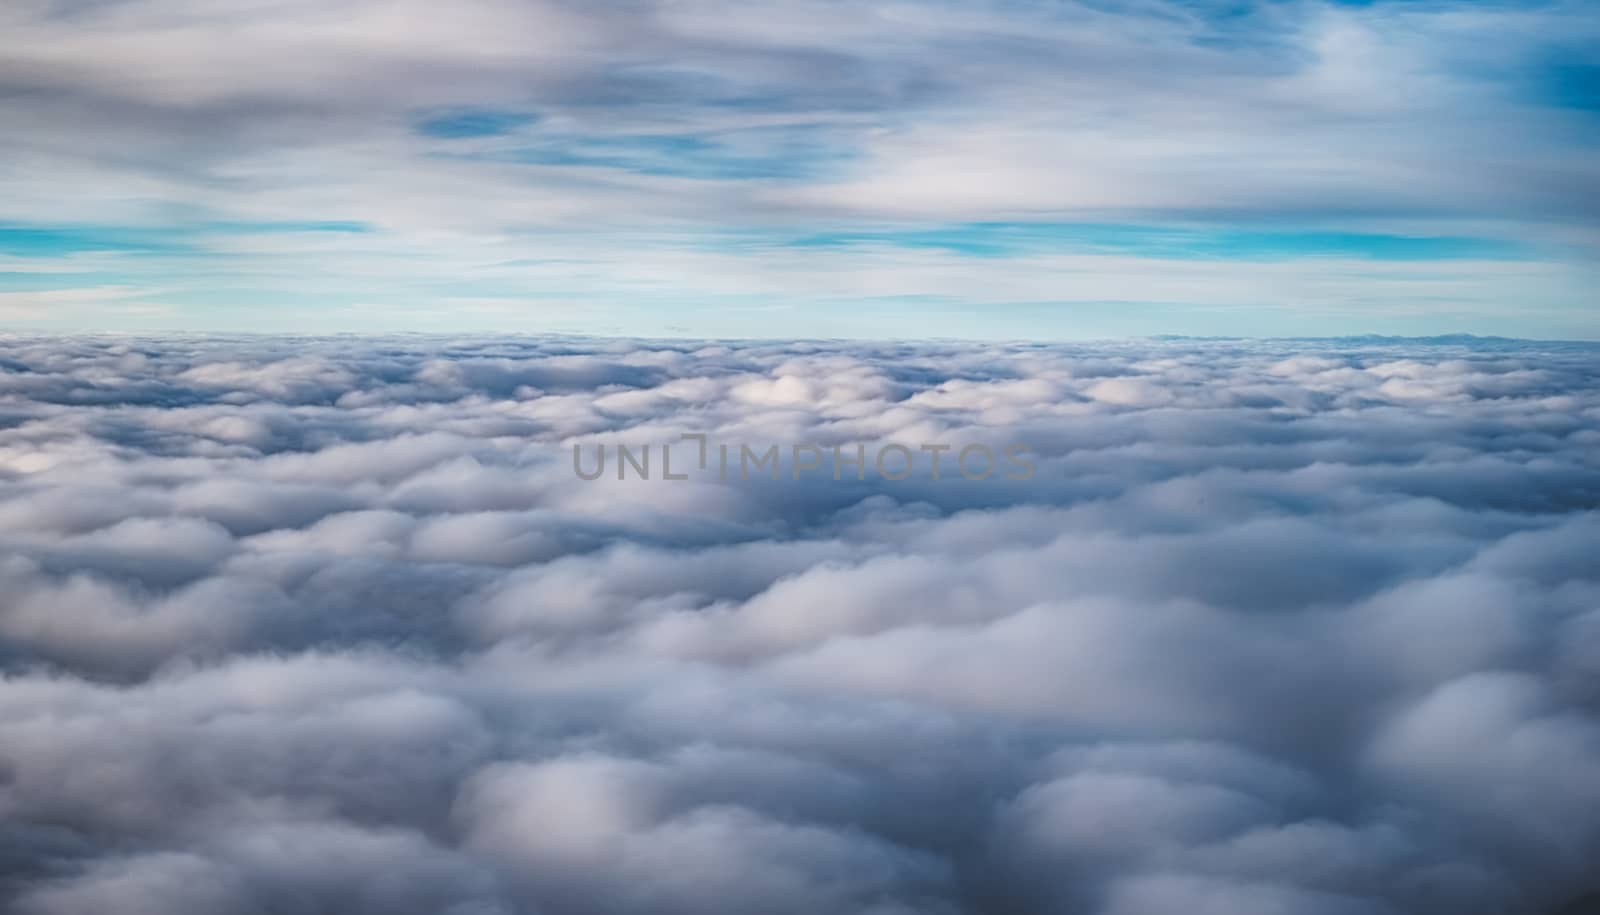 Over the clouds by Roberto